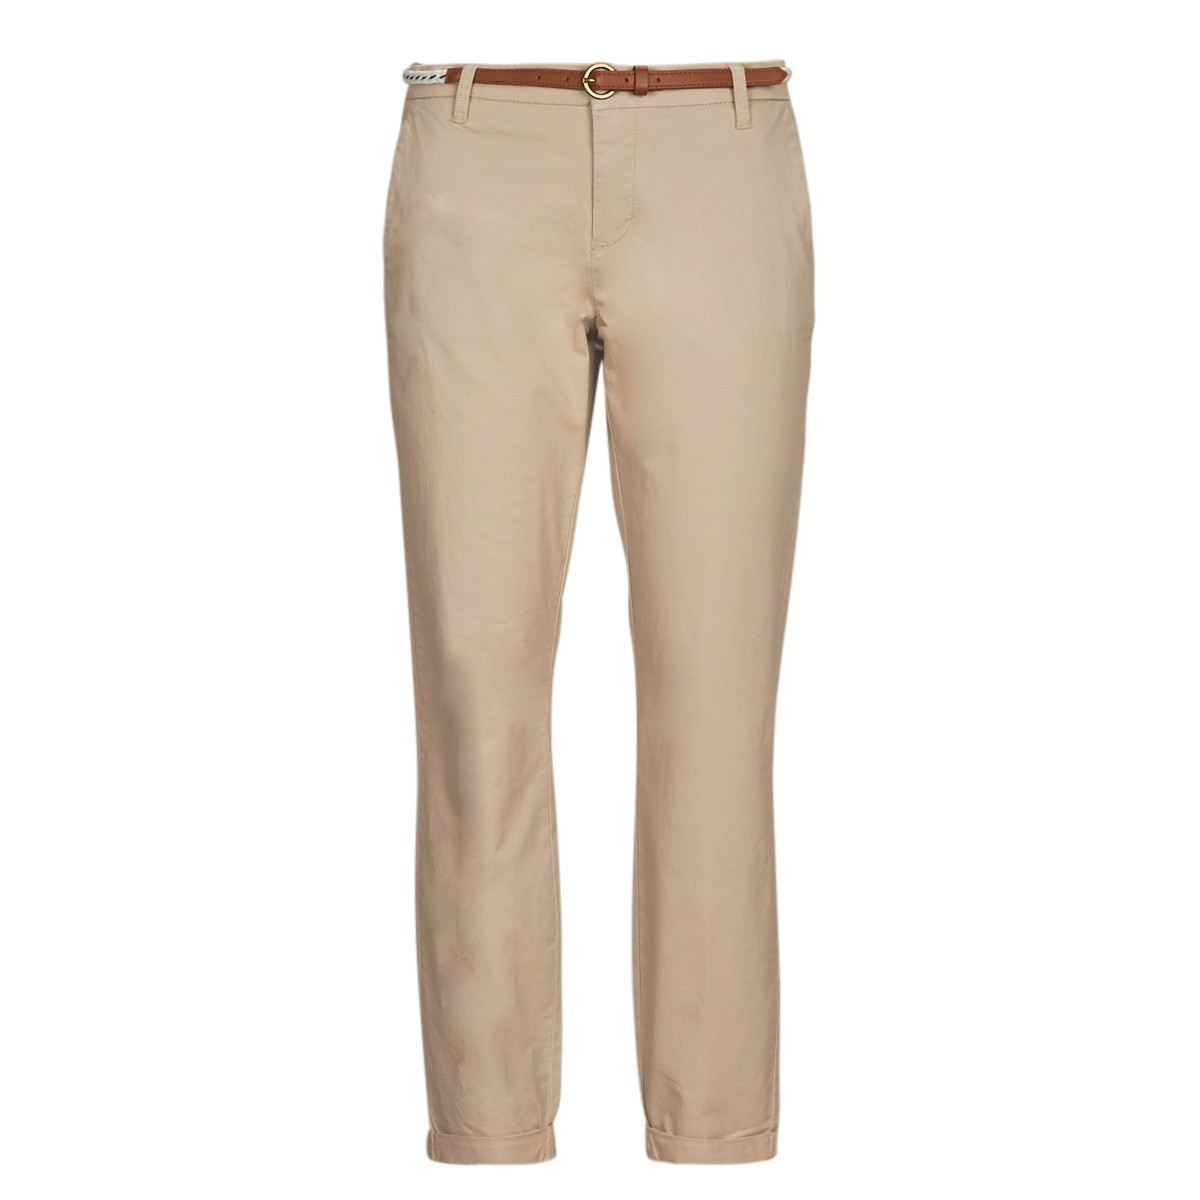 COTTON - | NET Women ONLBIANA CC Spartoo PNT Only Free ! - BELT Clothing chinos delivery CHINO Beige